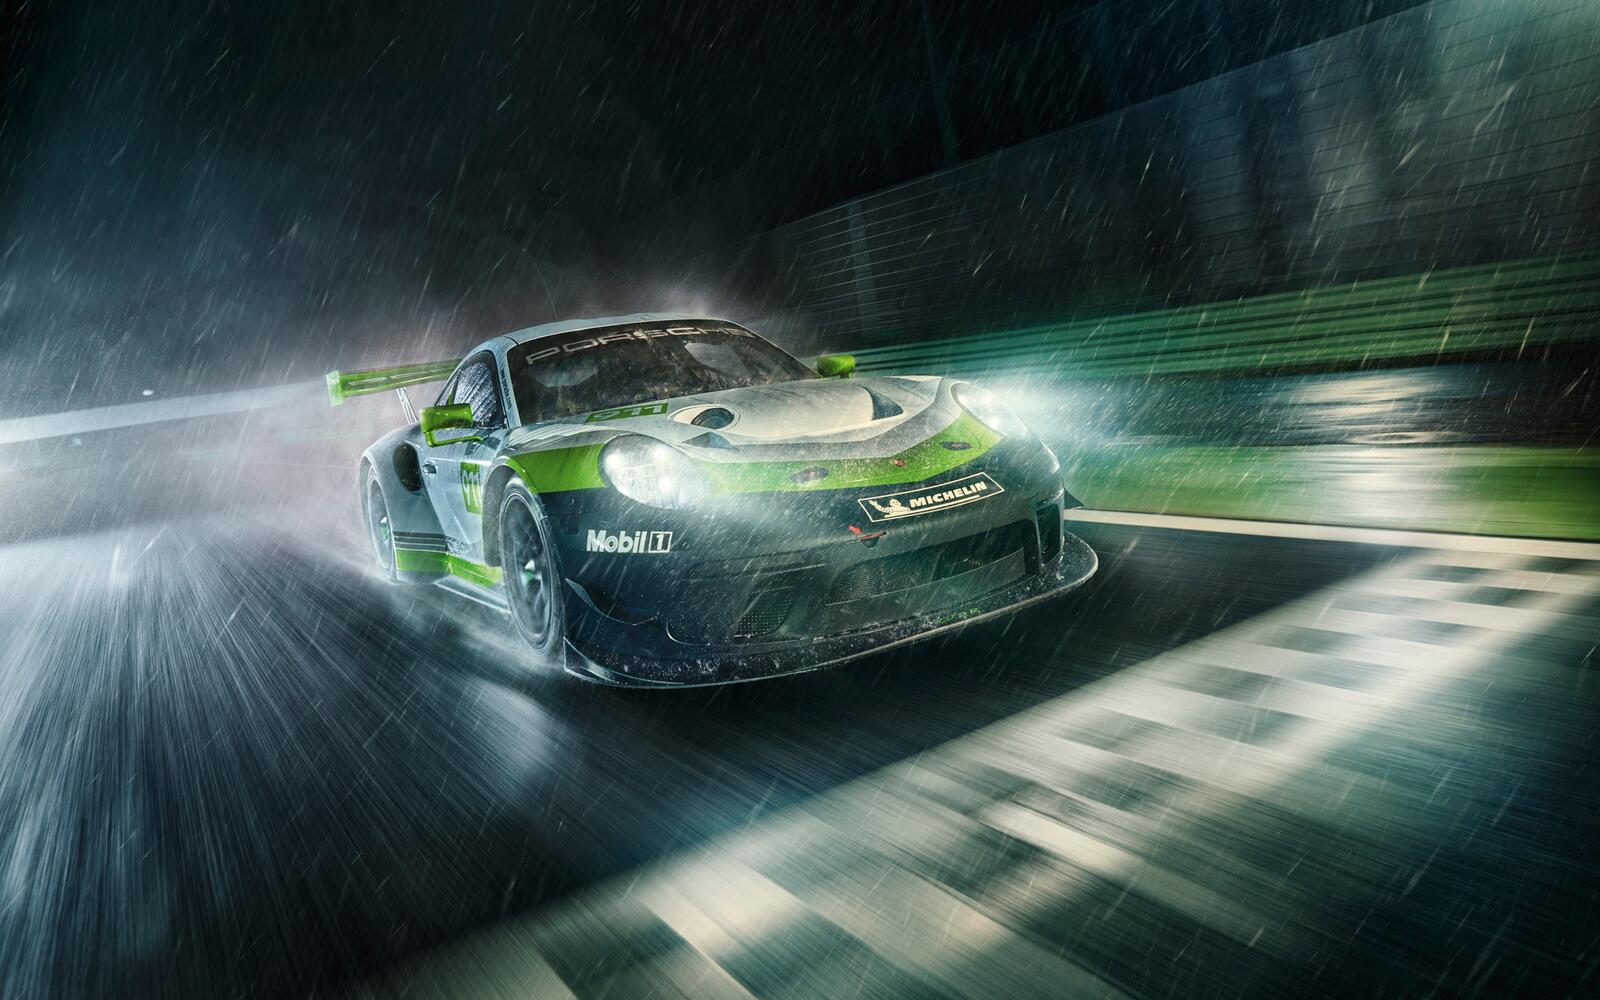 Free photo The Porsche 911 Gt3 R drives on a rainy road at night.